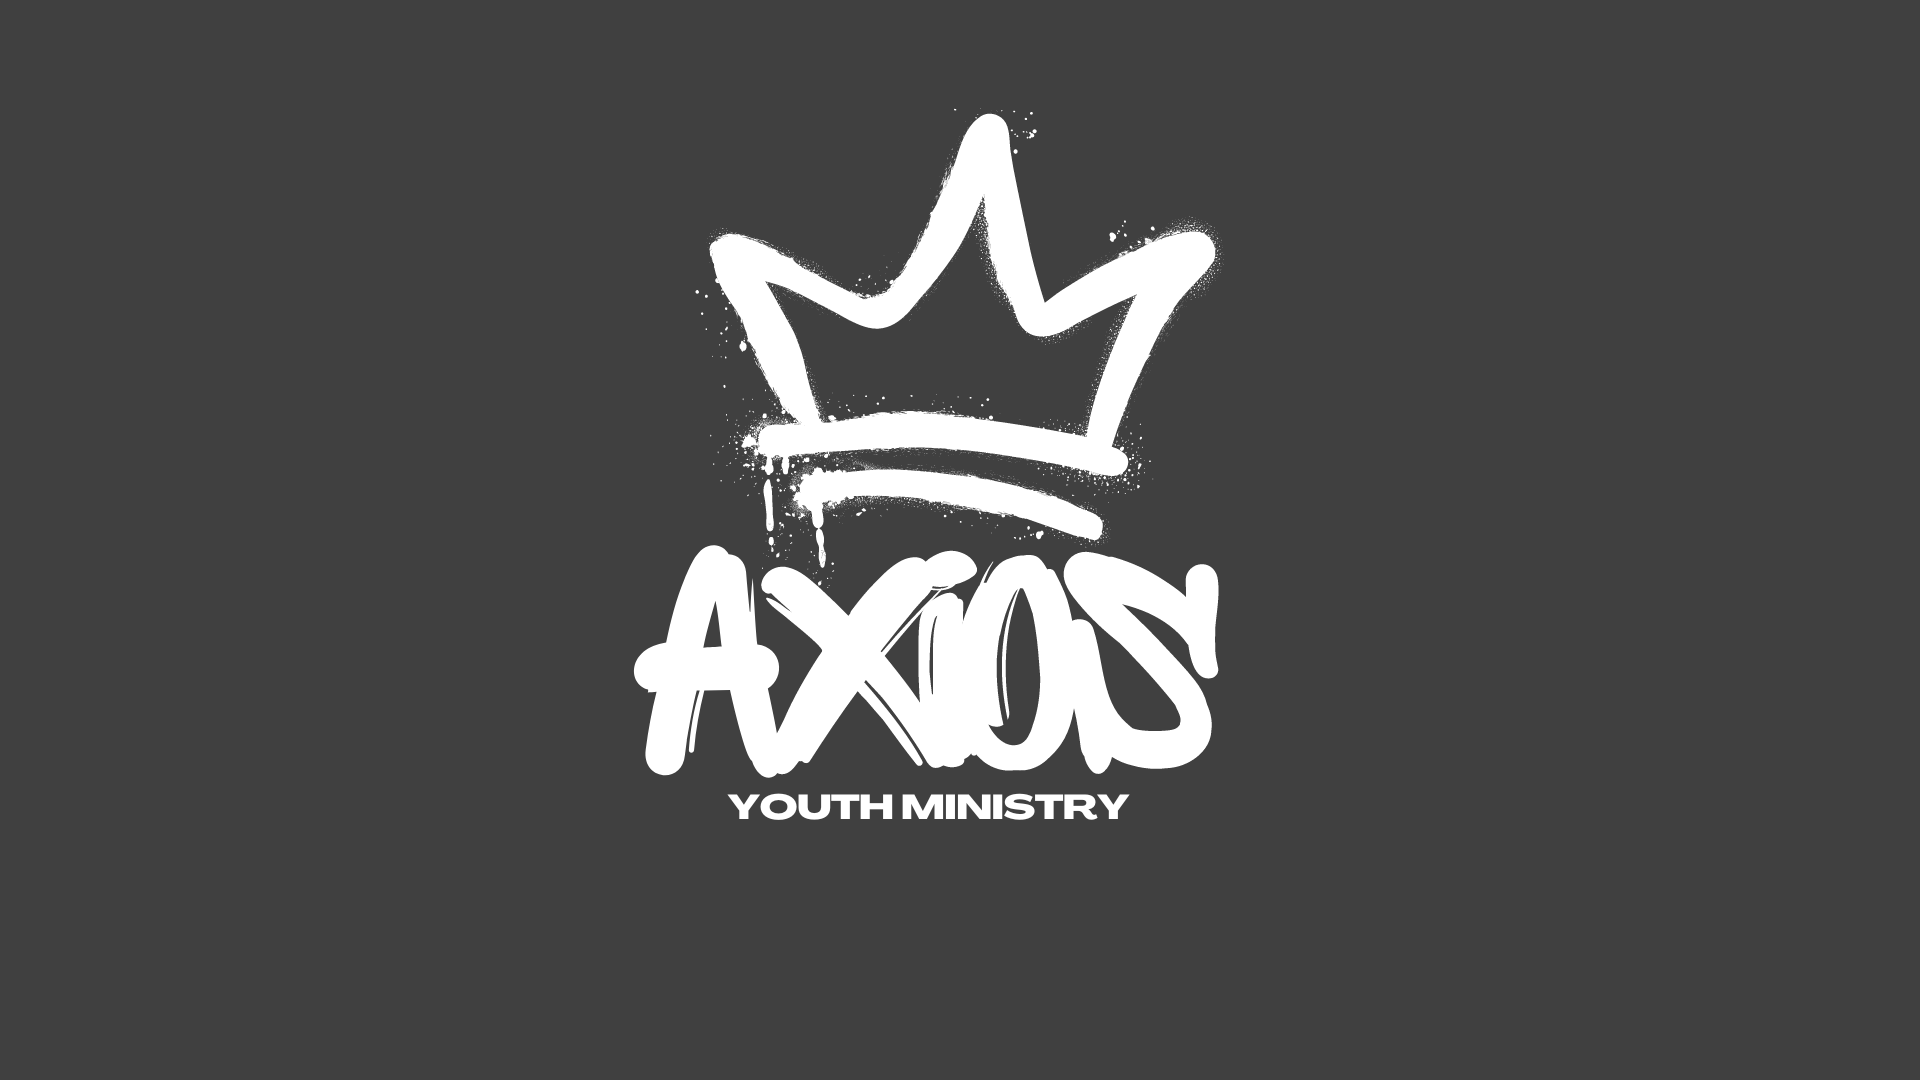 Axios Youth Ministry